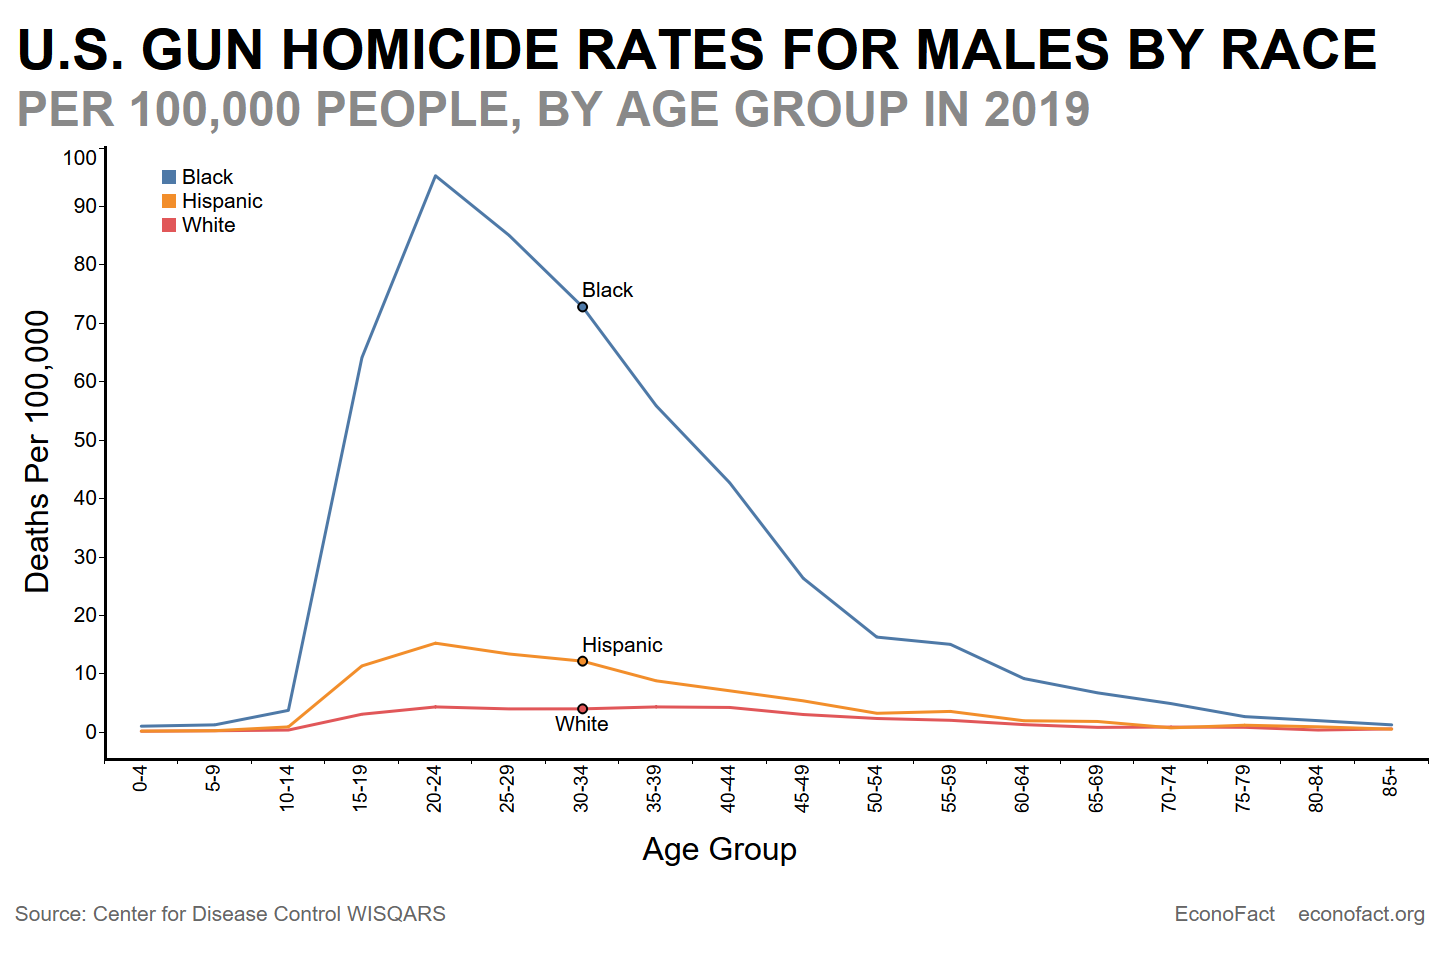 U.S. gun homicide rates for males, by age group and ethnicity in 2019. The gun homicide rate for black males aged 20-24 was ~22x the rate for white males aged 20-24